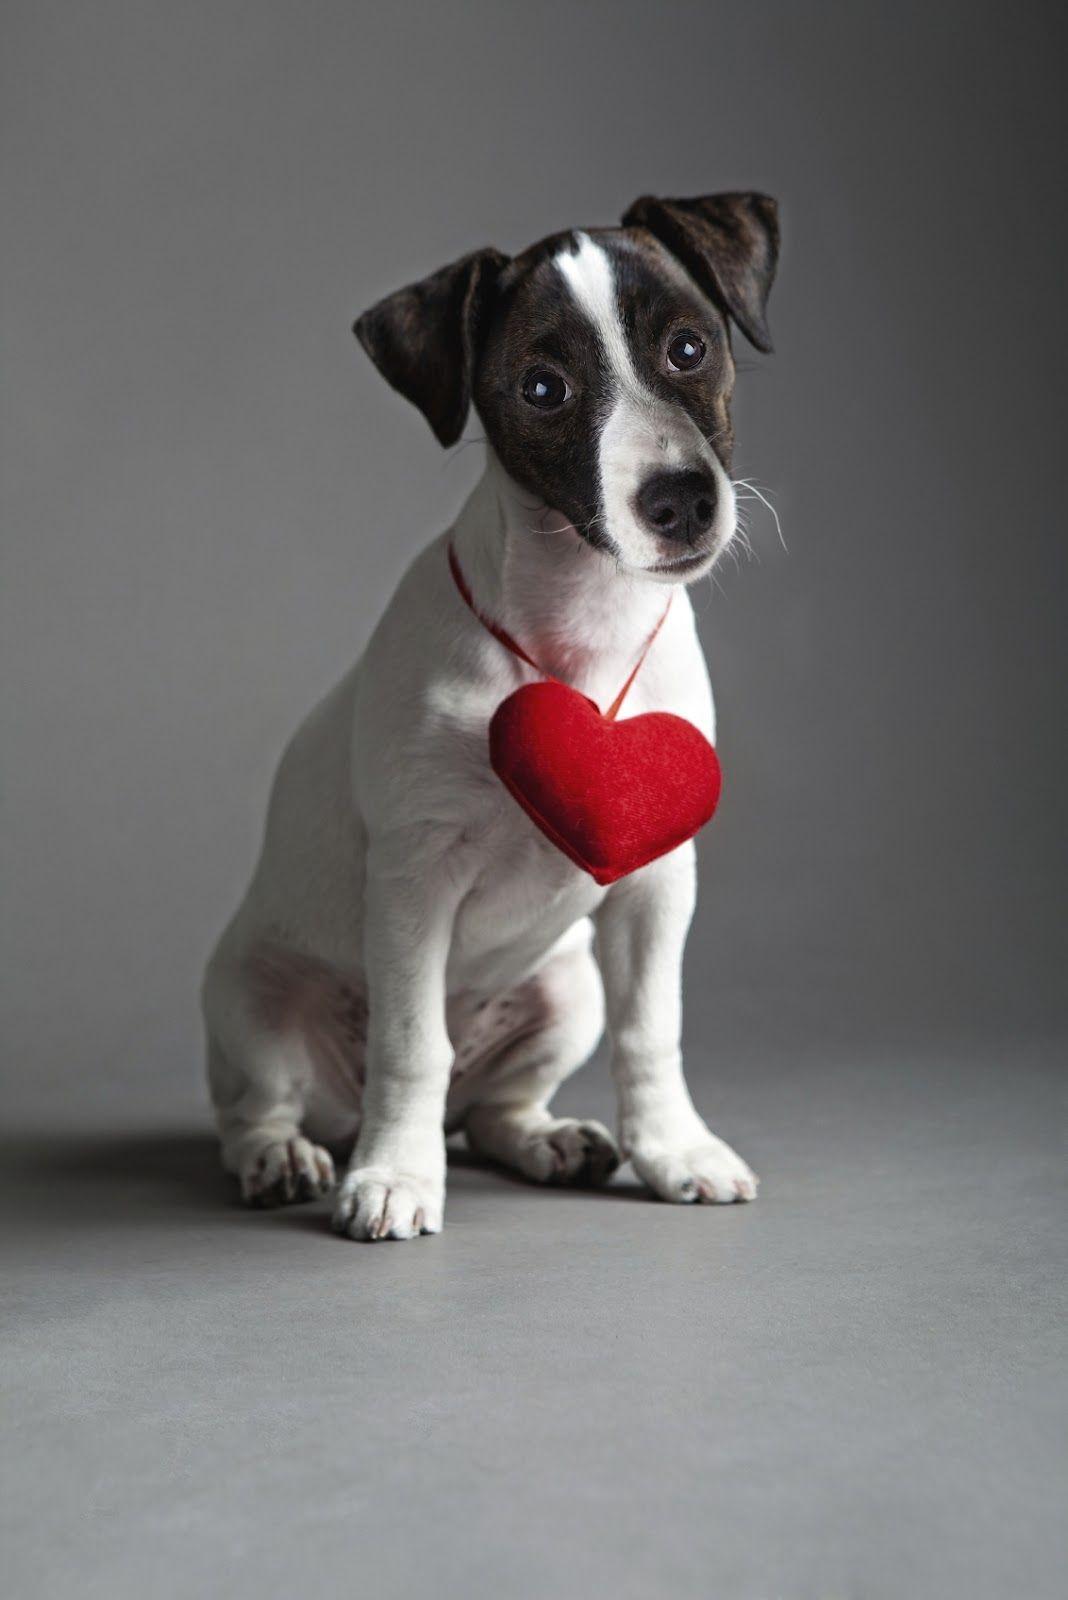 Jack Russell Terrier with heart photo and wallpaper. Beautiful Jack